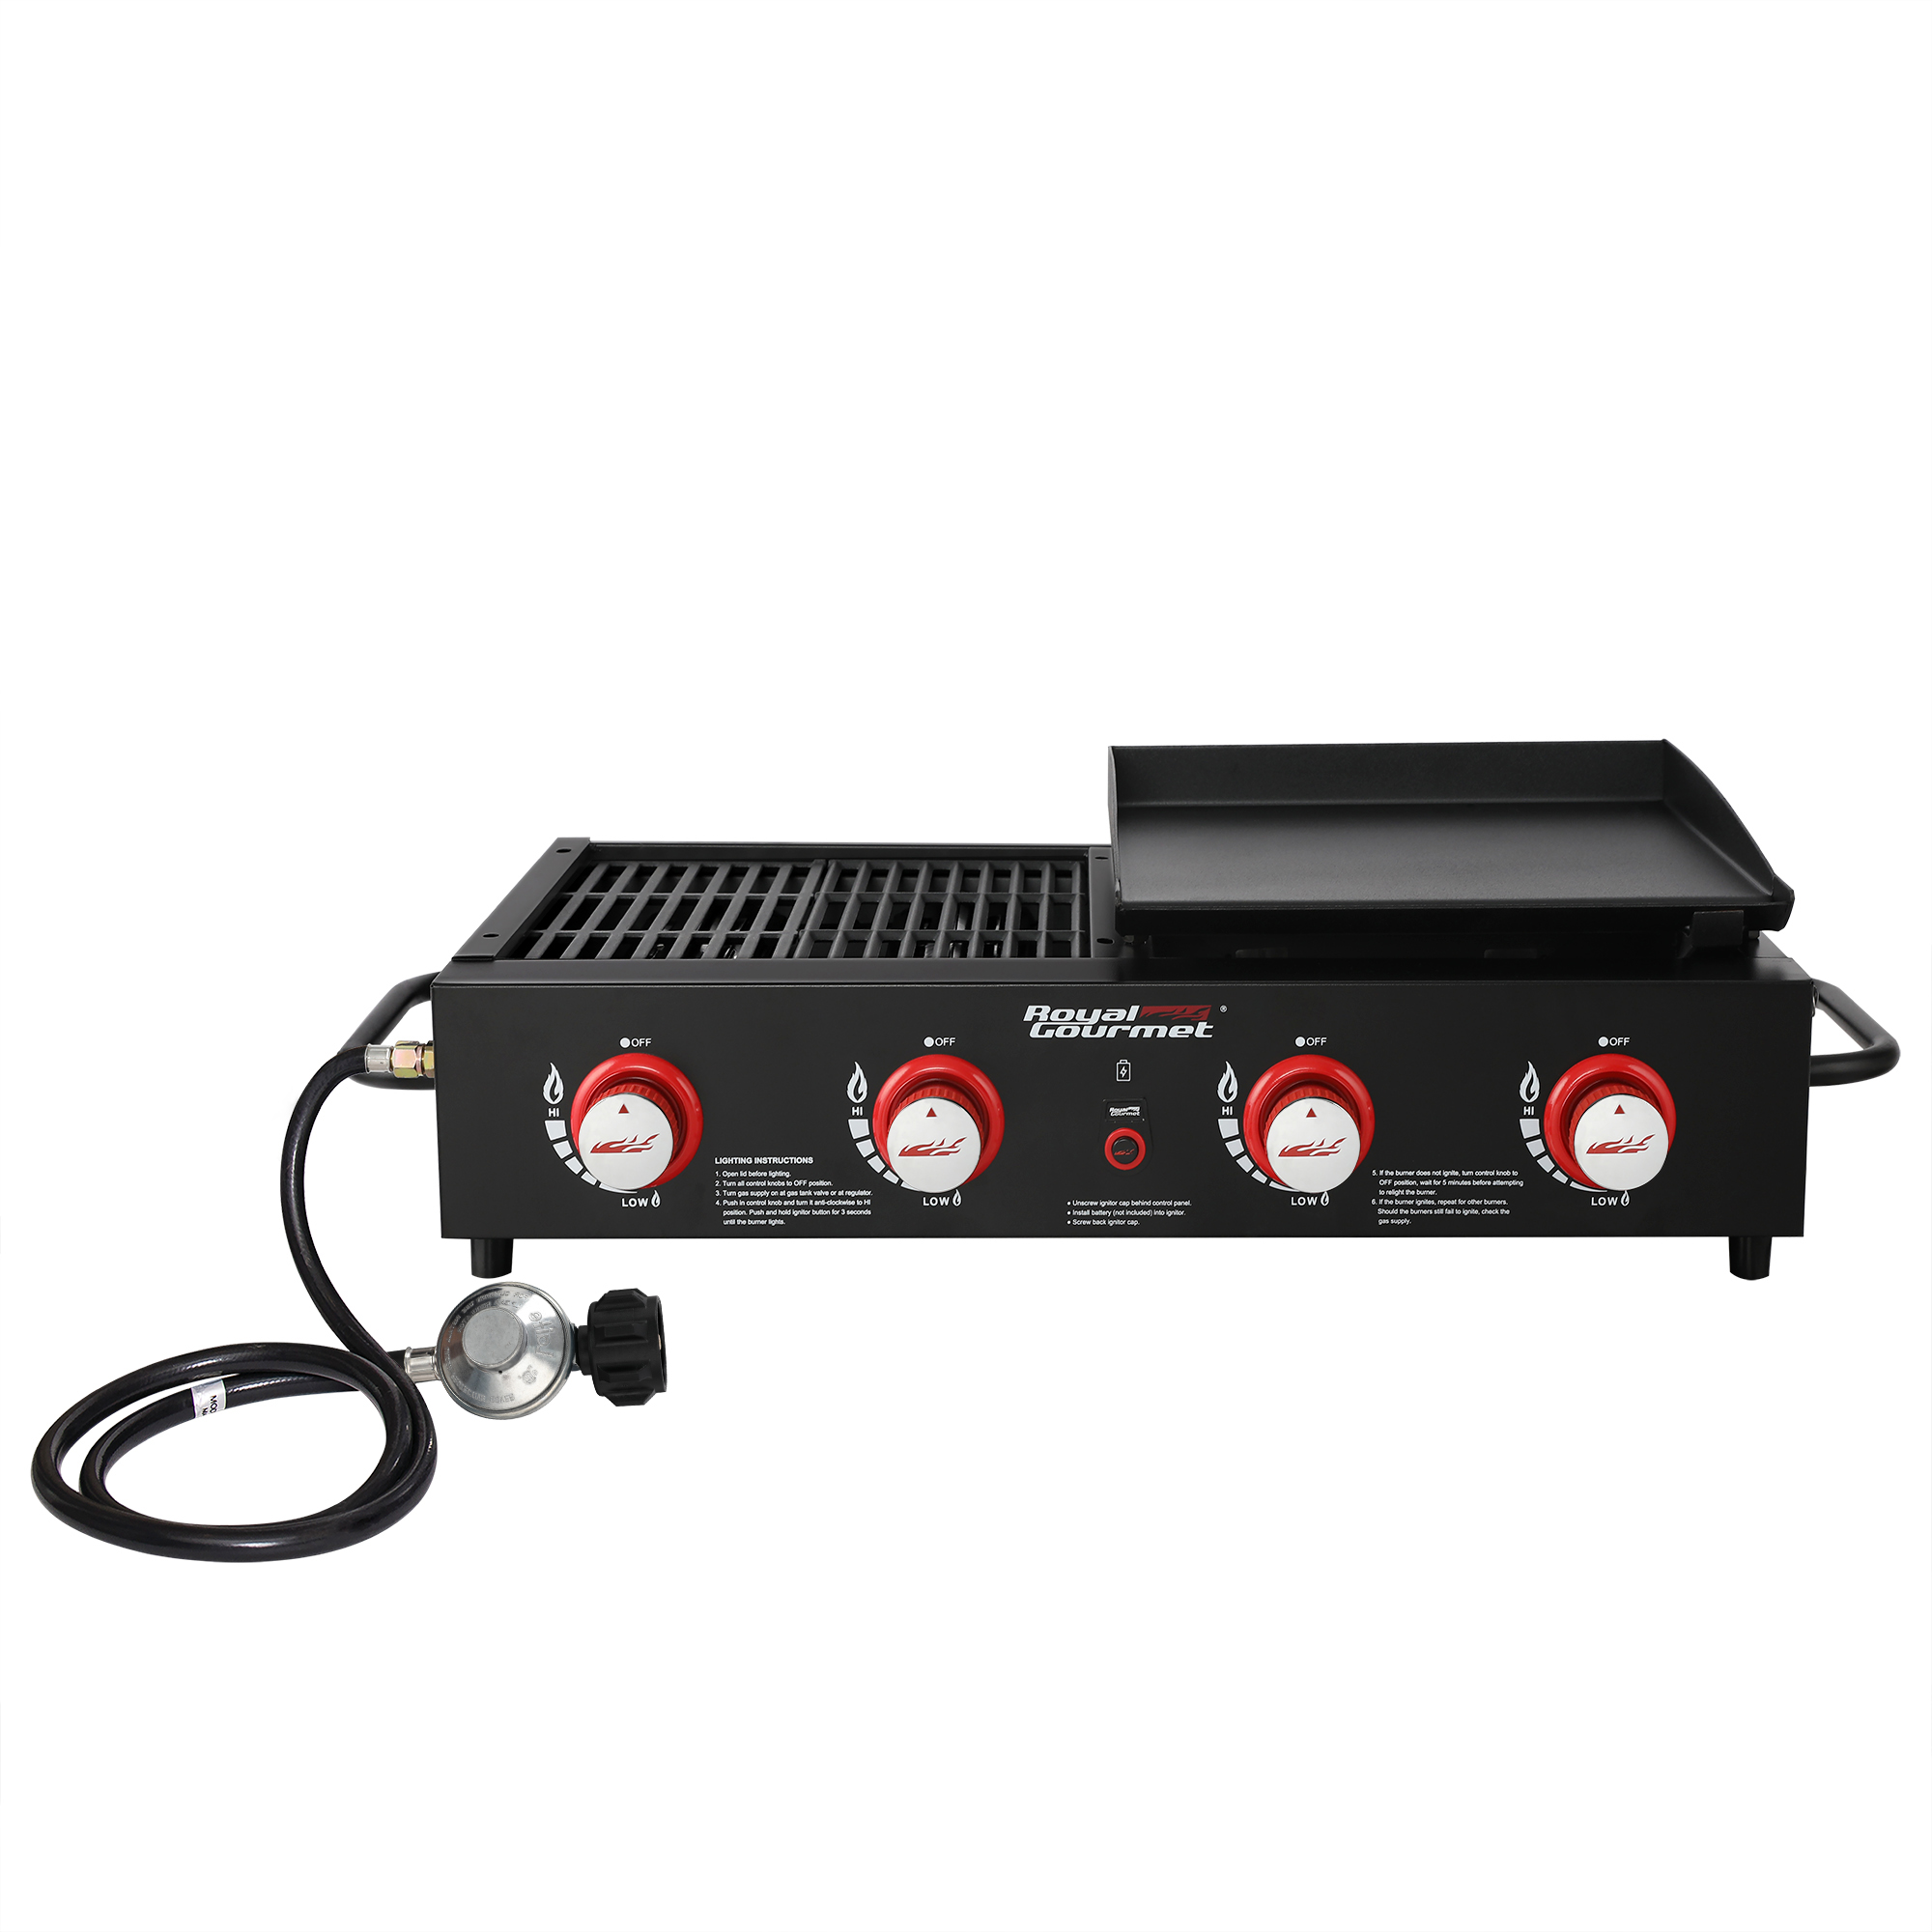 Royal Gourmet 4-Burner GD4002T Portable Gas Grill and Griddle Combo, 40000 BTU - image 1 of 19